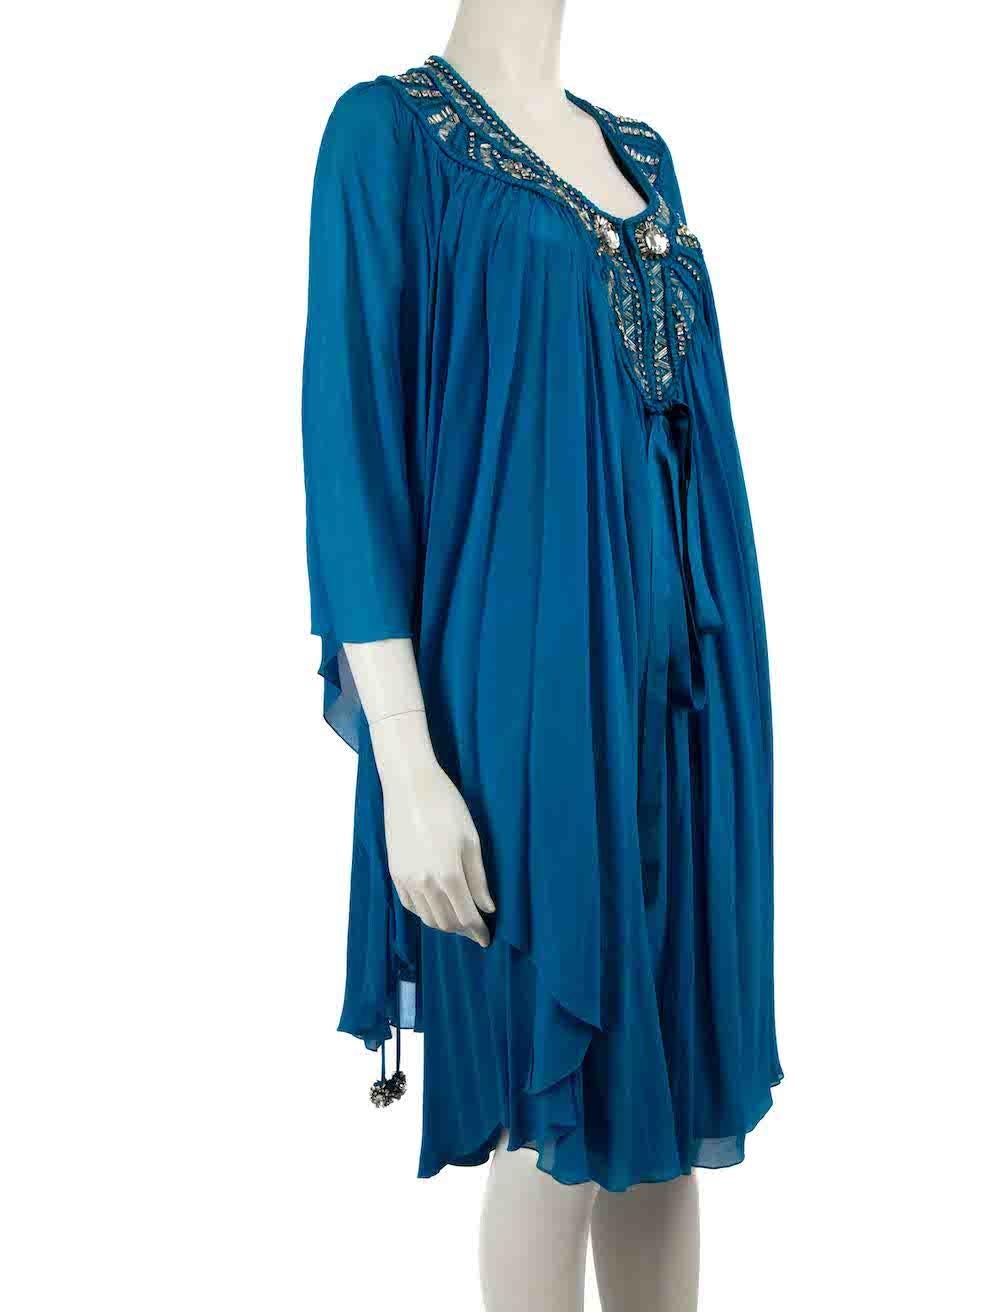 CONDITION is Very good. Minimal wear to dress is evident. Minimal pluck to weave to centre front and right sleeve on this used Temperley London designer resale item.
 
 
 
 Details
 
 
 Blue
 
 Silk
 
 Knee length dress
 
 Crystal sequin embellished